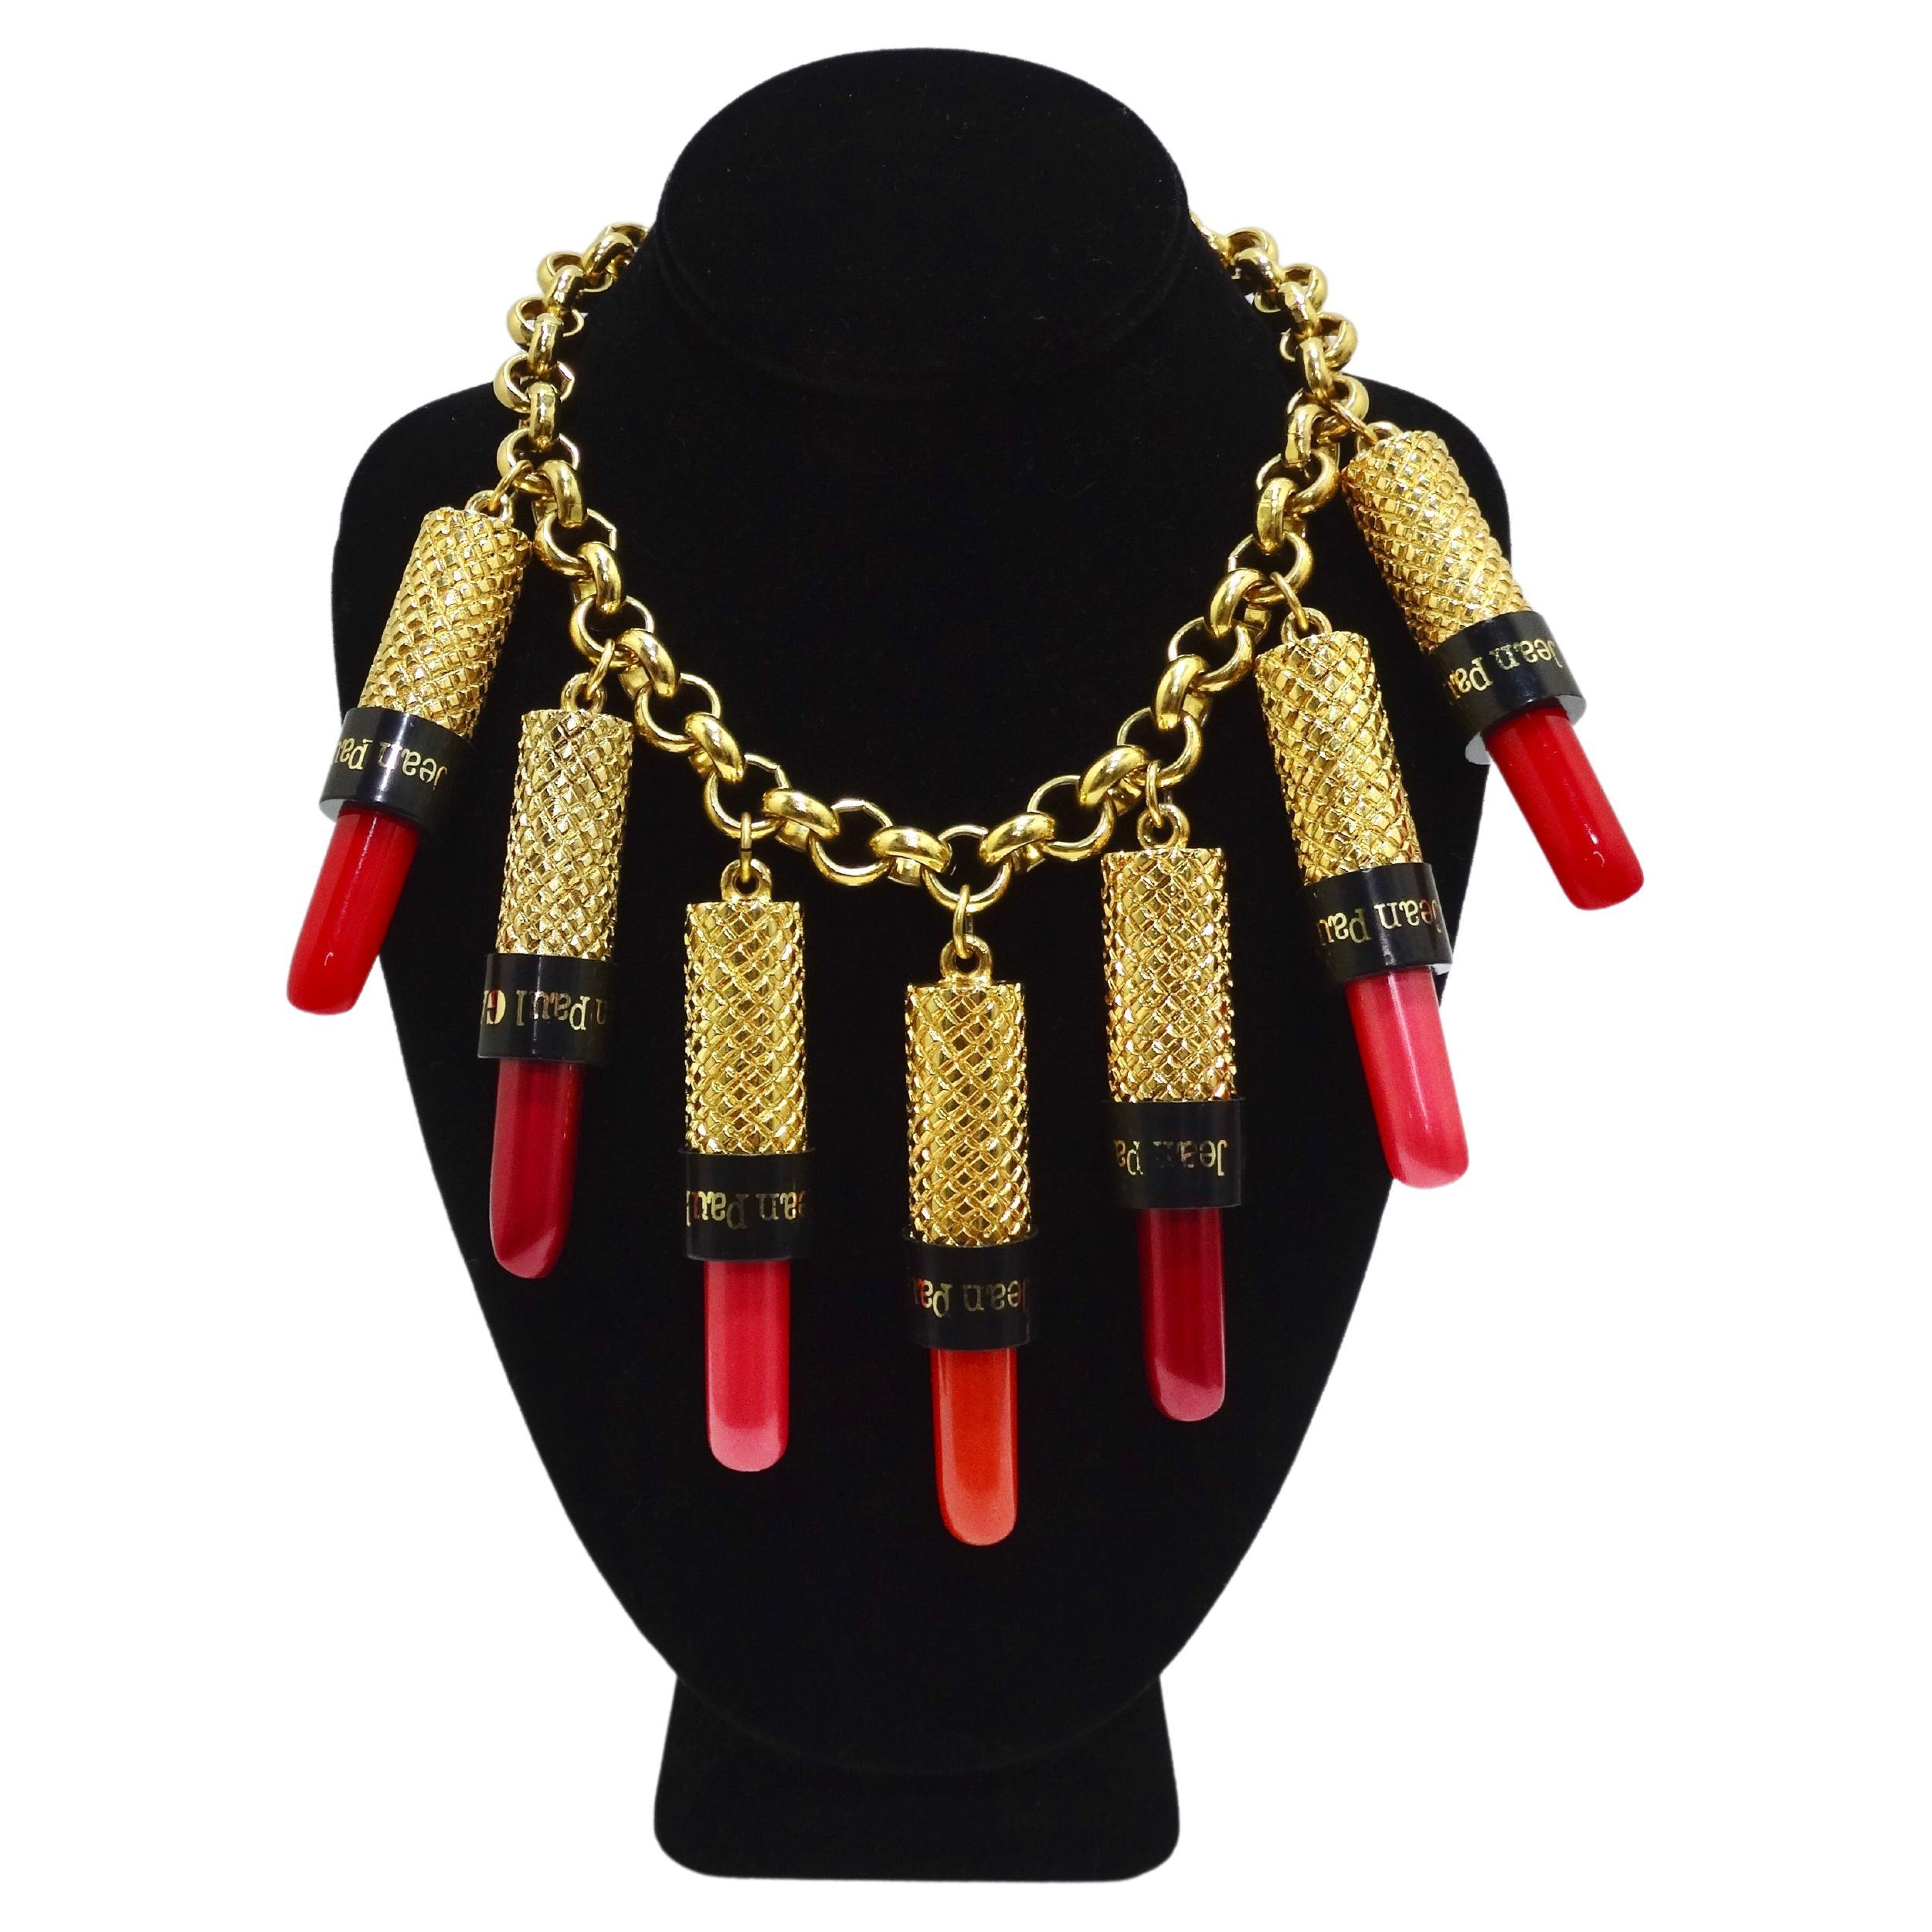 Jean Paul Gaultier collectors assemble! He did not hold back on this design dangled large lipstick pendants to a chunky gold circle link-chain. The lipstick pendants are beautifully textured, feature a classic combo of red and black, and each have